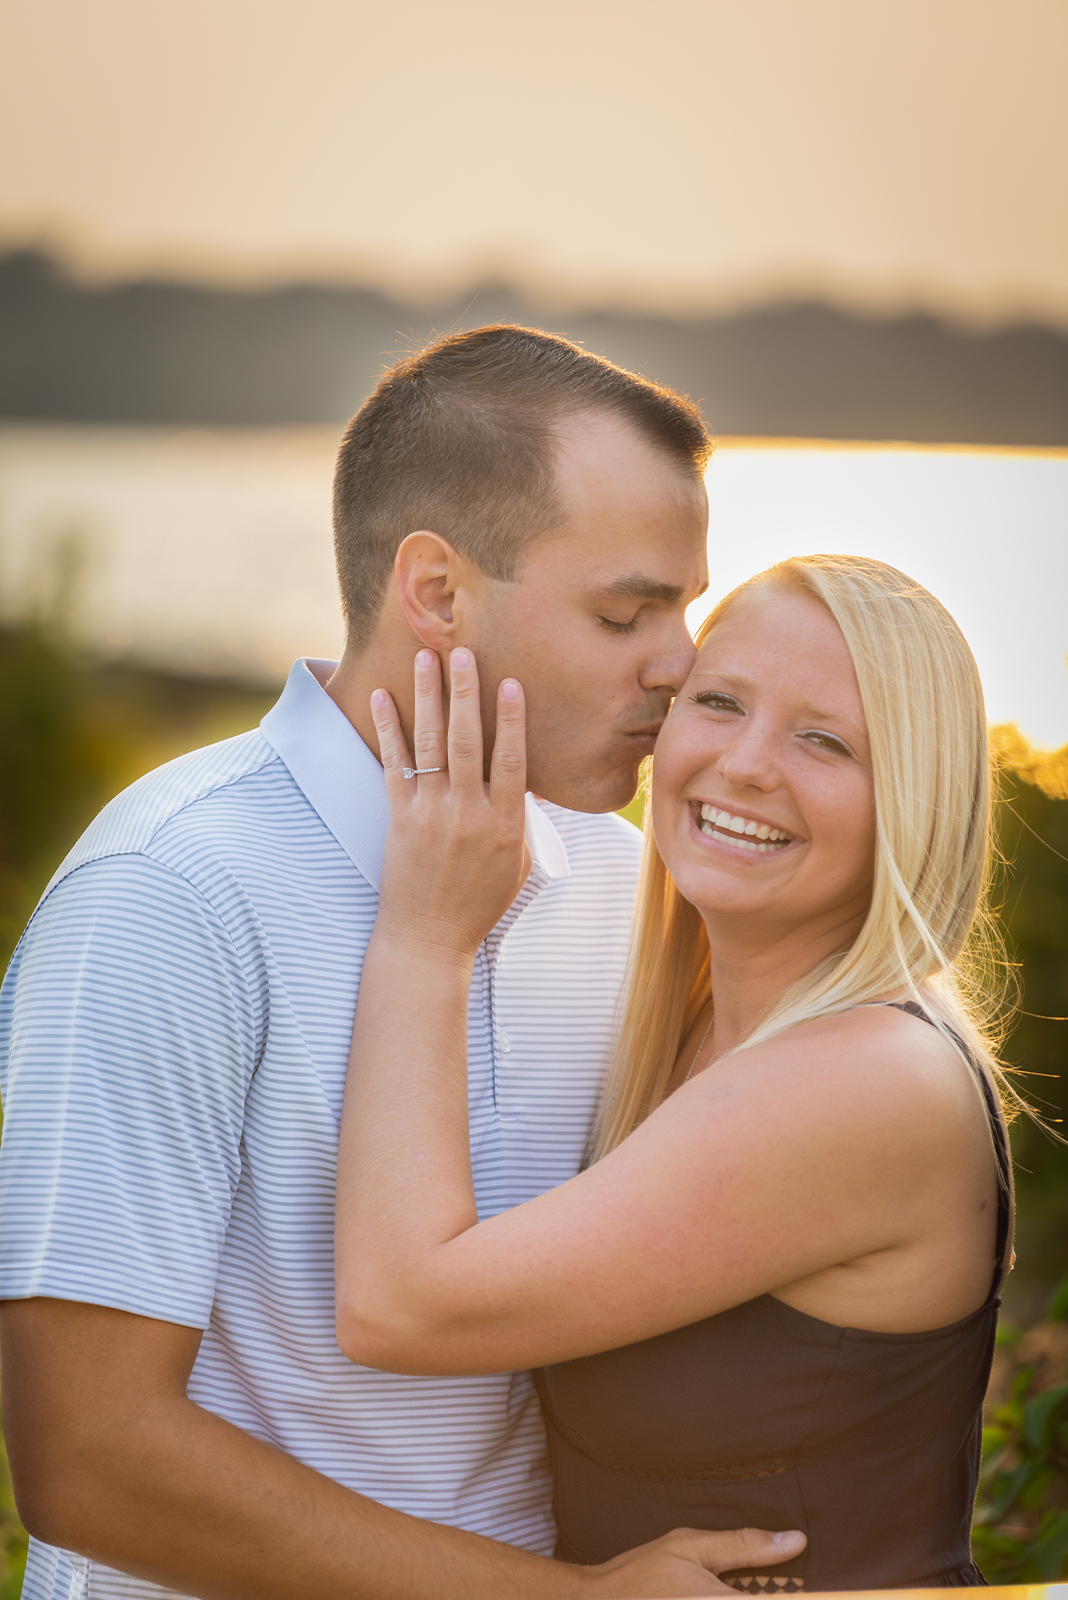 Man and woman fiancee engagement photo, couple portrait, kiss, smile, engagement ring, cute, sweet, sunset, golden hour, nature, Lake Erie, Edgewater Beach, Cleveland Metroparks